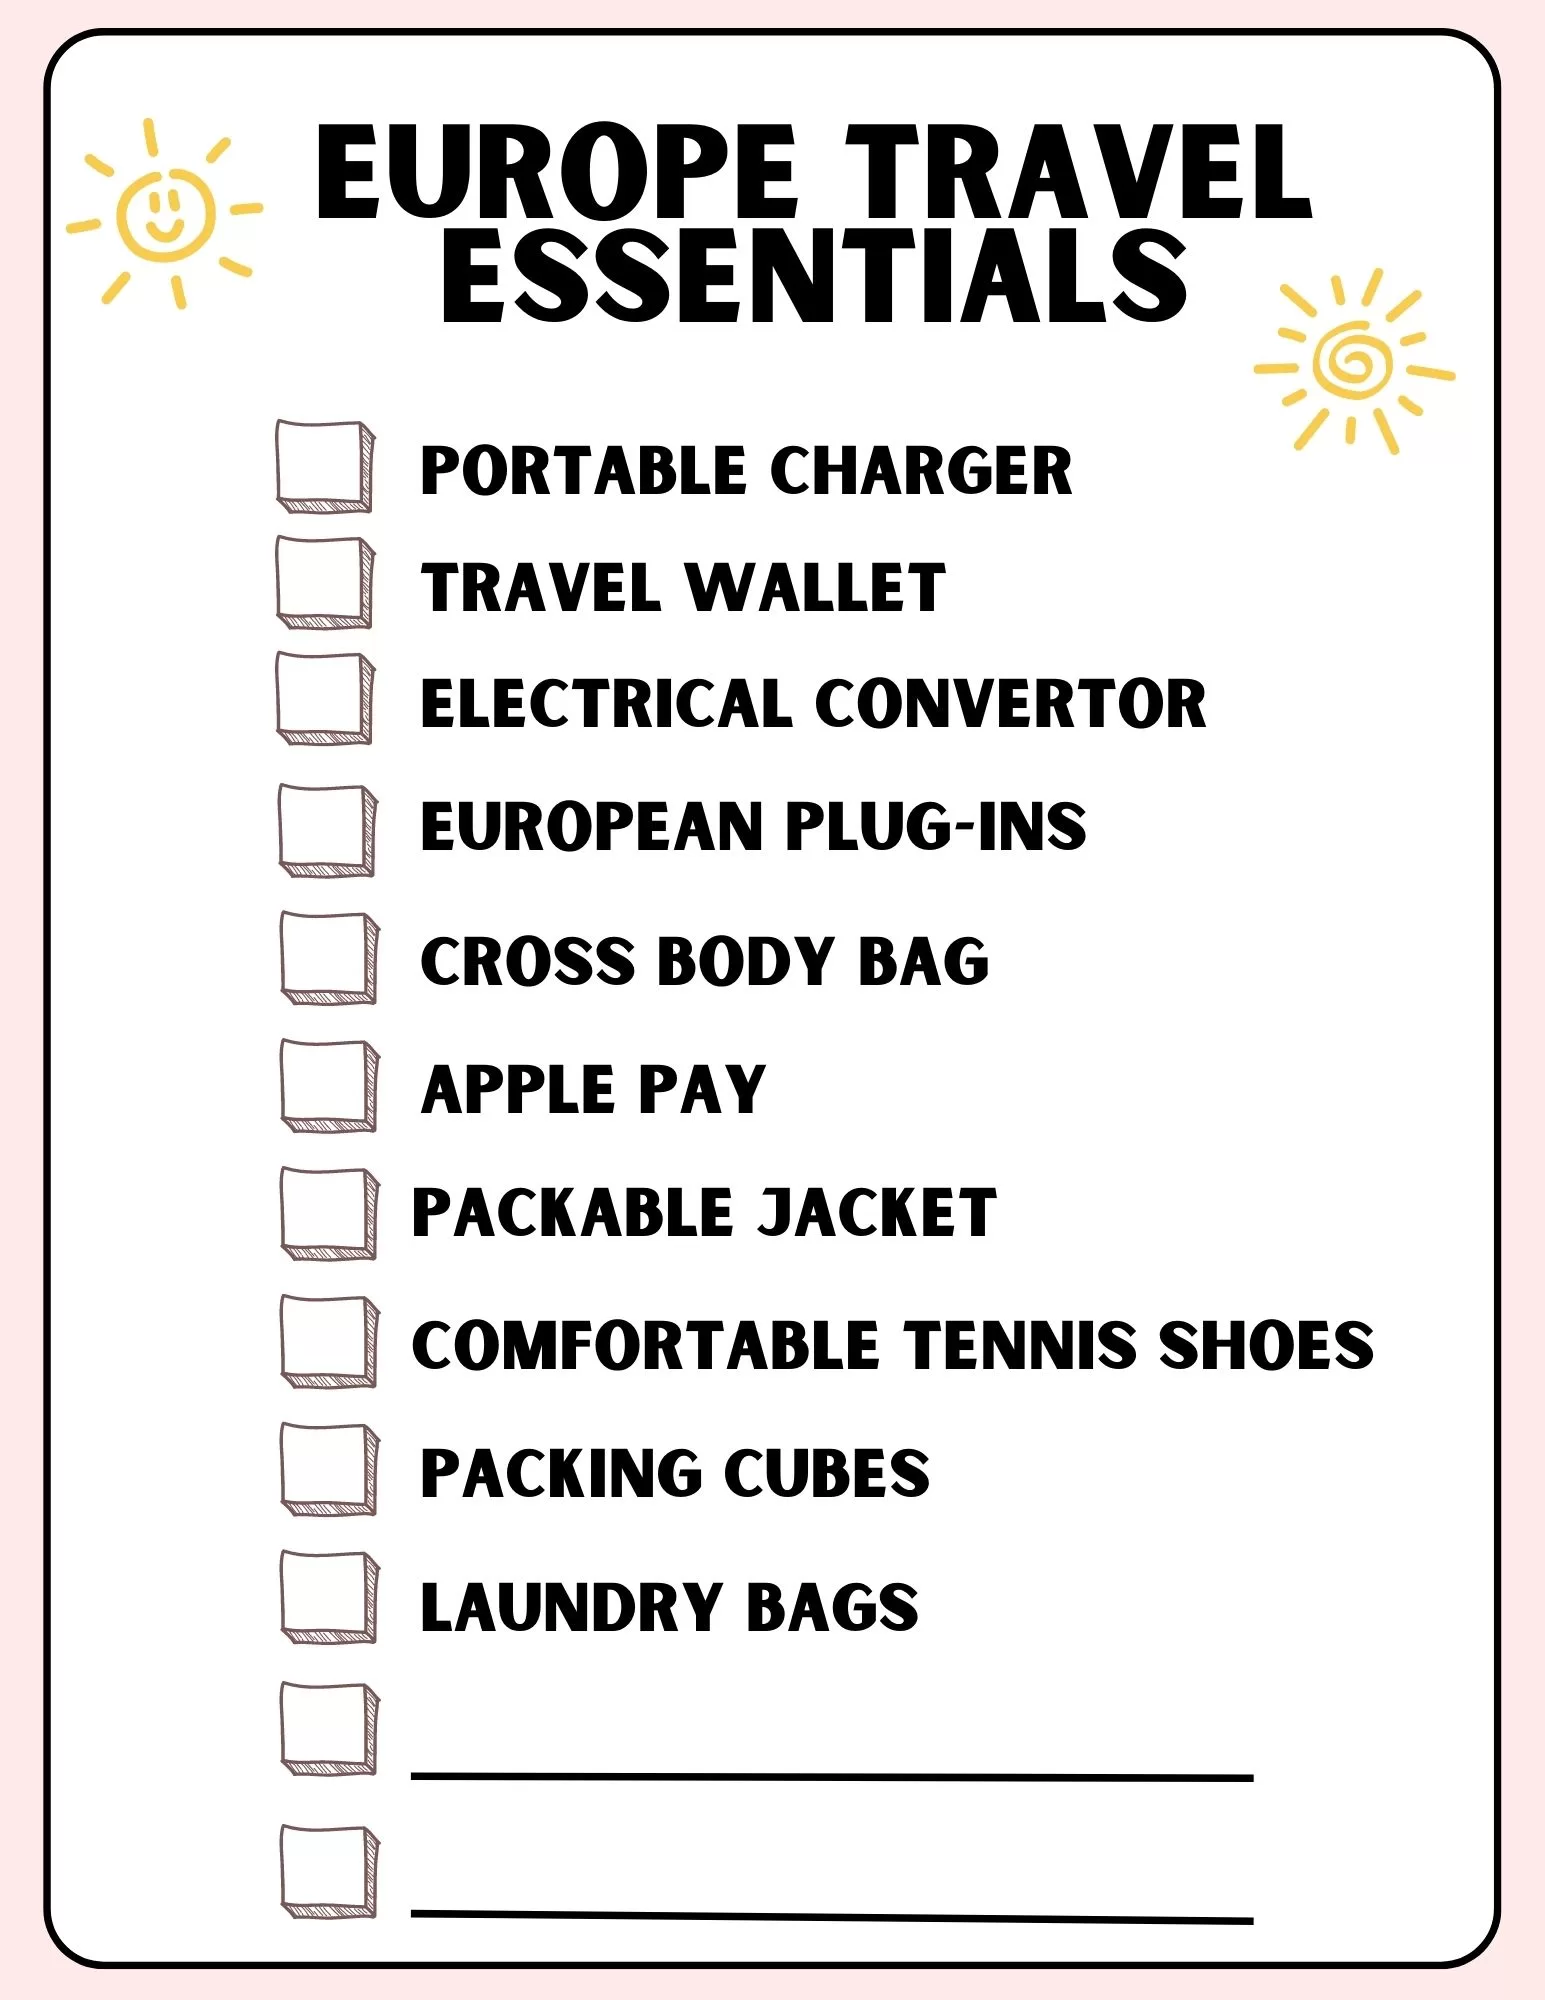 Europe Travel Essentials Checklist. This image shows a printable packing list for Europe